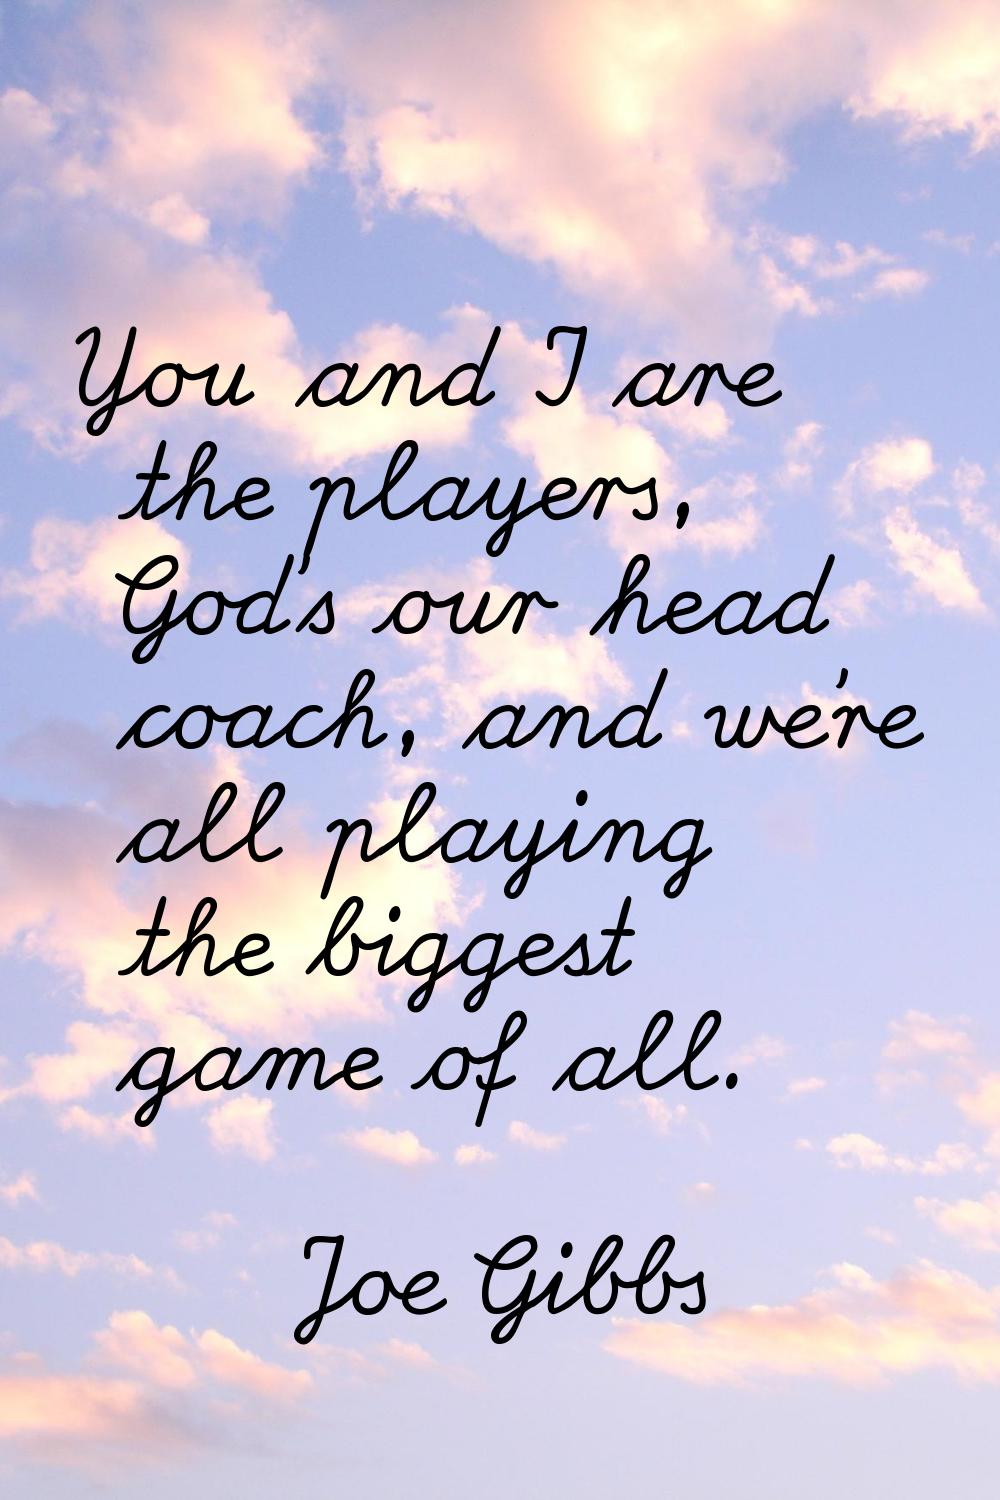 You and I are the players, God's our head coach, and we're all playing the biggest game of all.